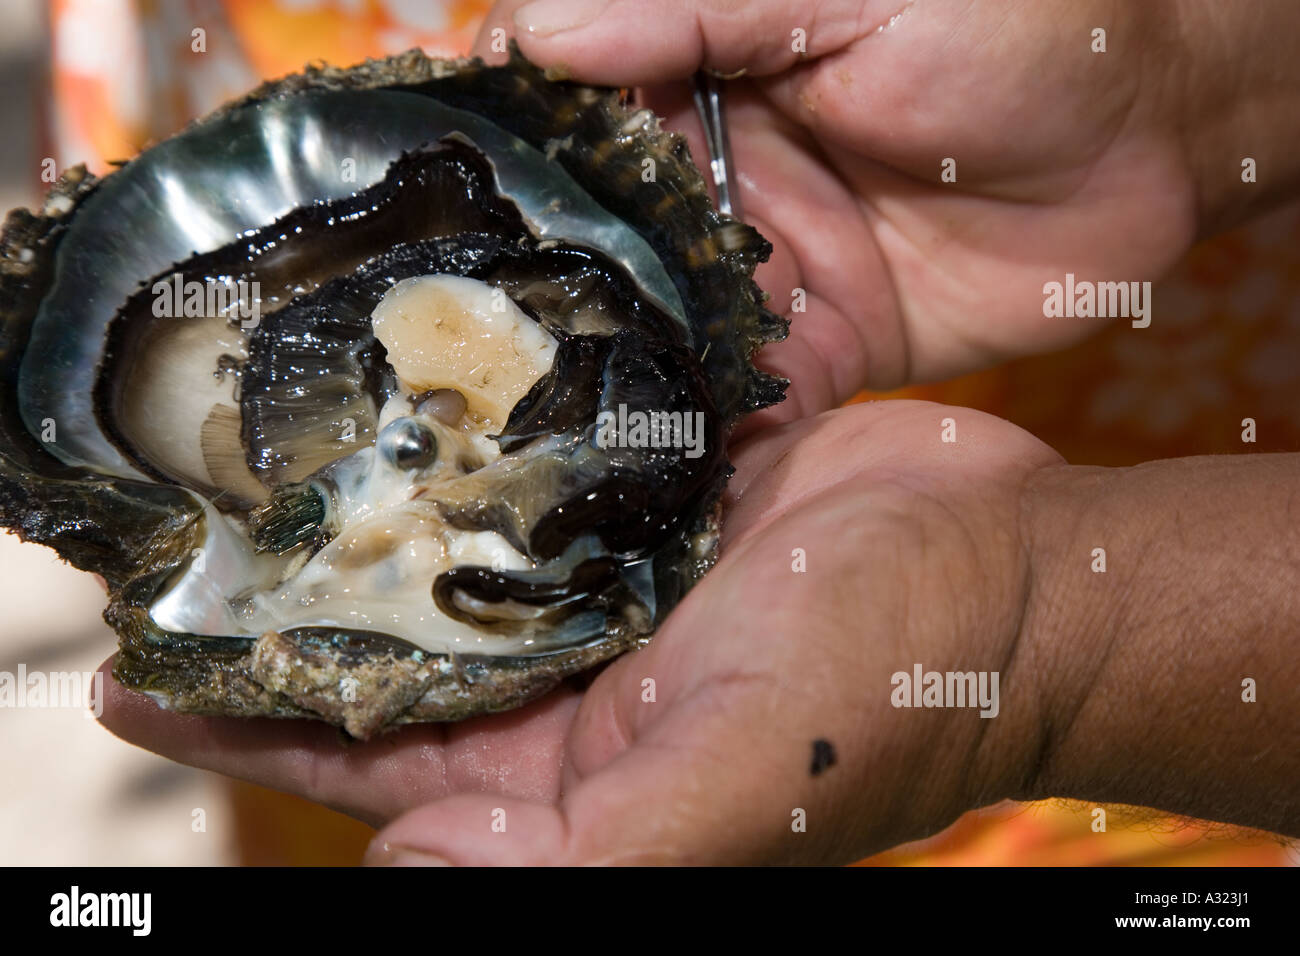 Balck pearl in oyster Stock Photo